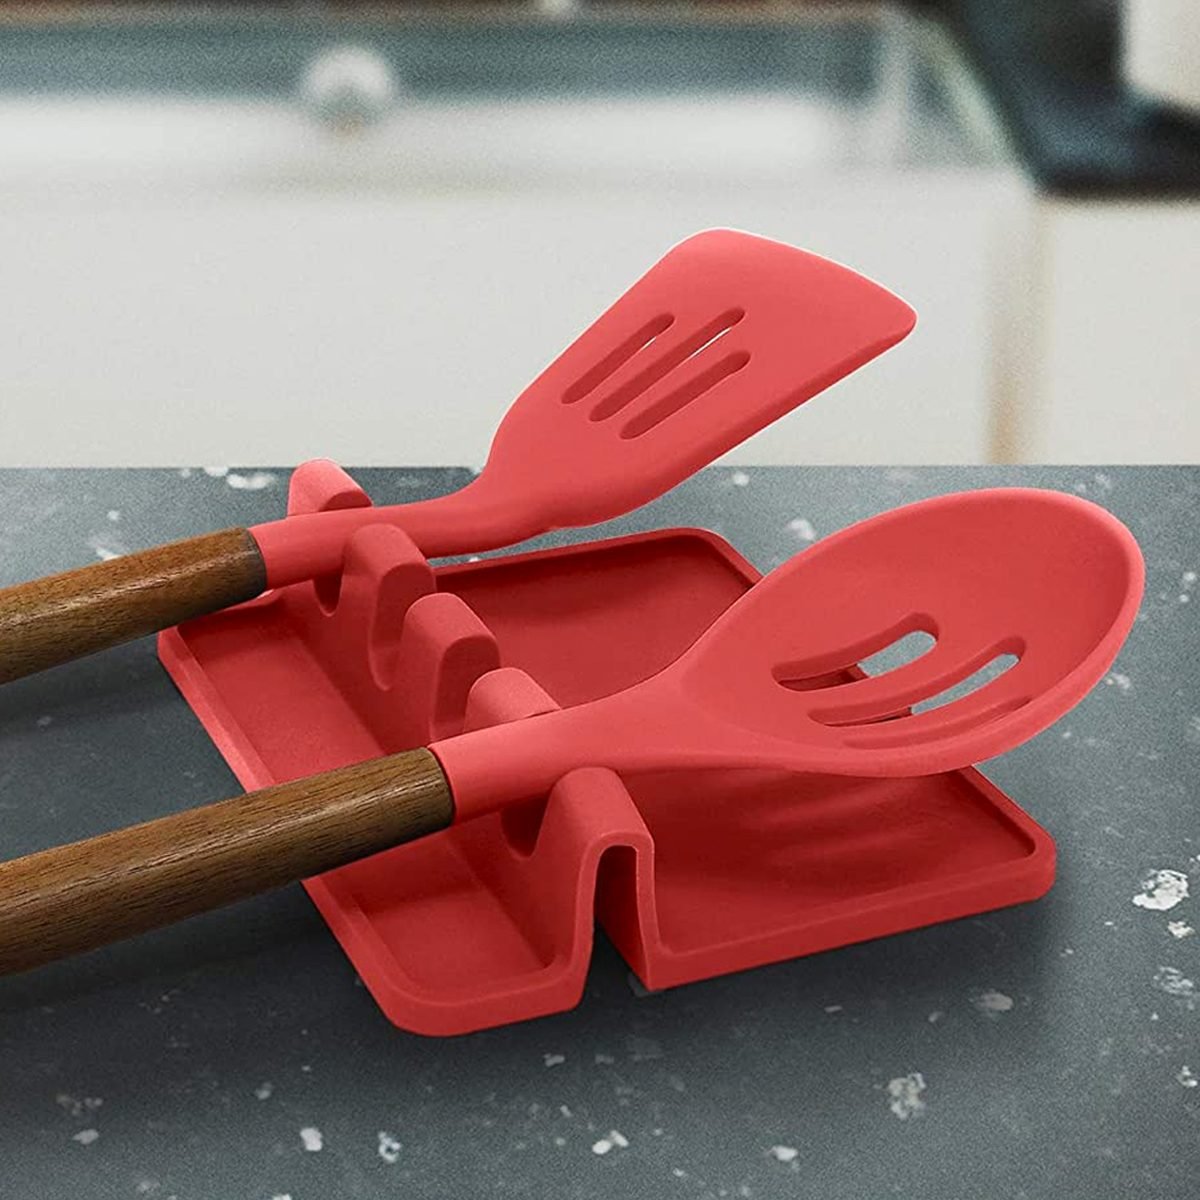 This Silicone Utensil Rest Has Over 20,000 Ratings on